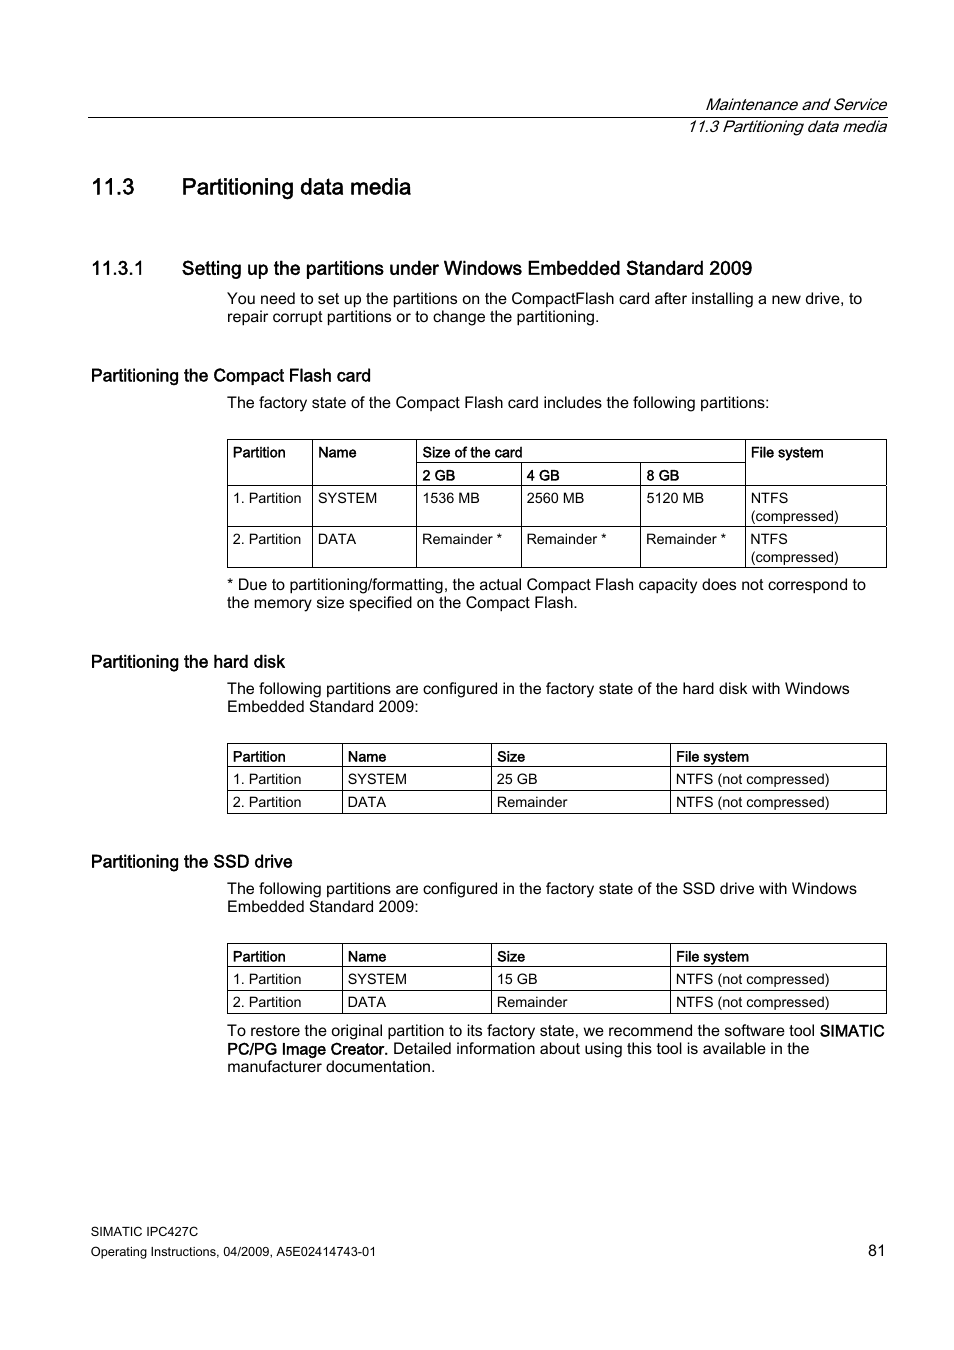 3 partitioning data media | Siemens Simatic Industrial PC IPC427C User Manual | Page 81 / 170